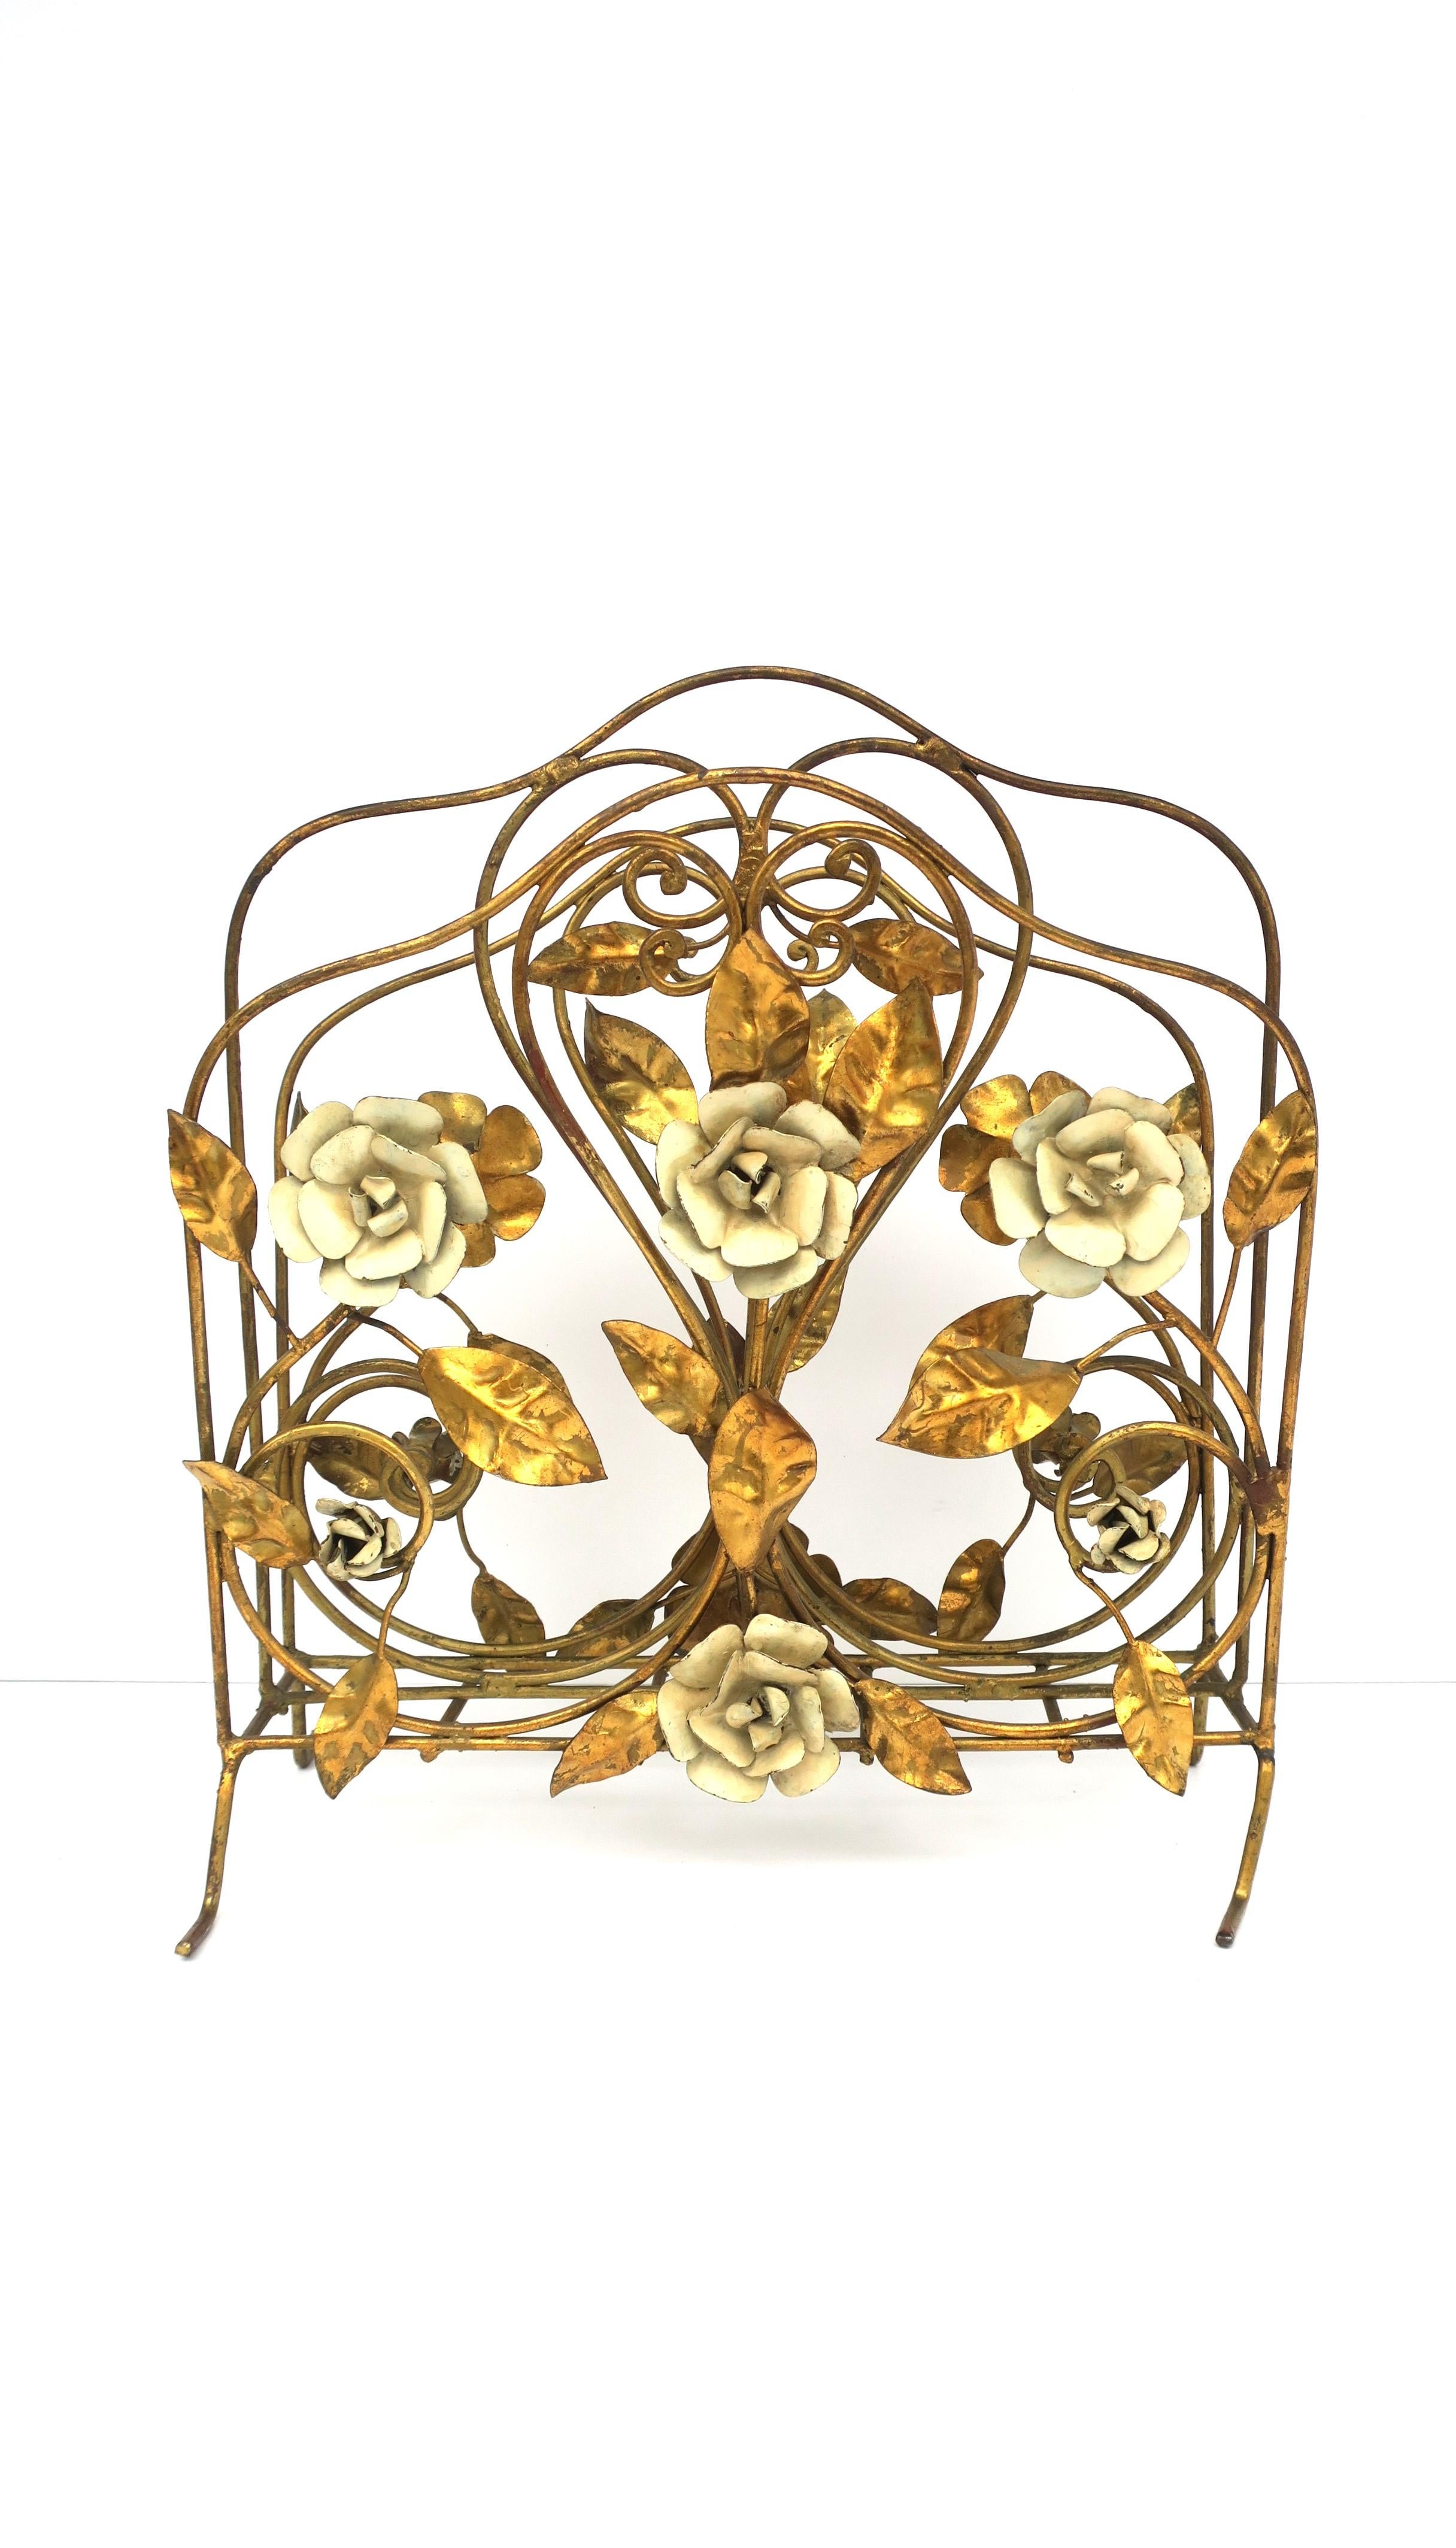 Italian Gold Gilt Magazine Holder Rack with Flowers and Leaves, 1950s For Sale 4